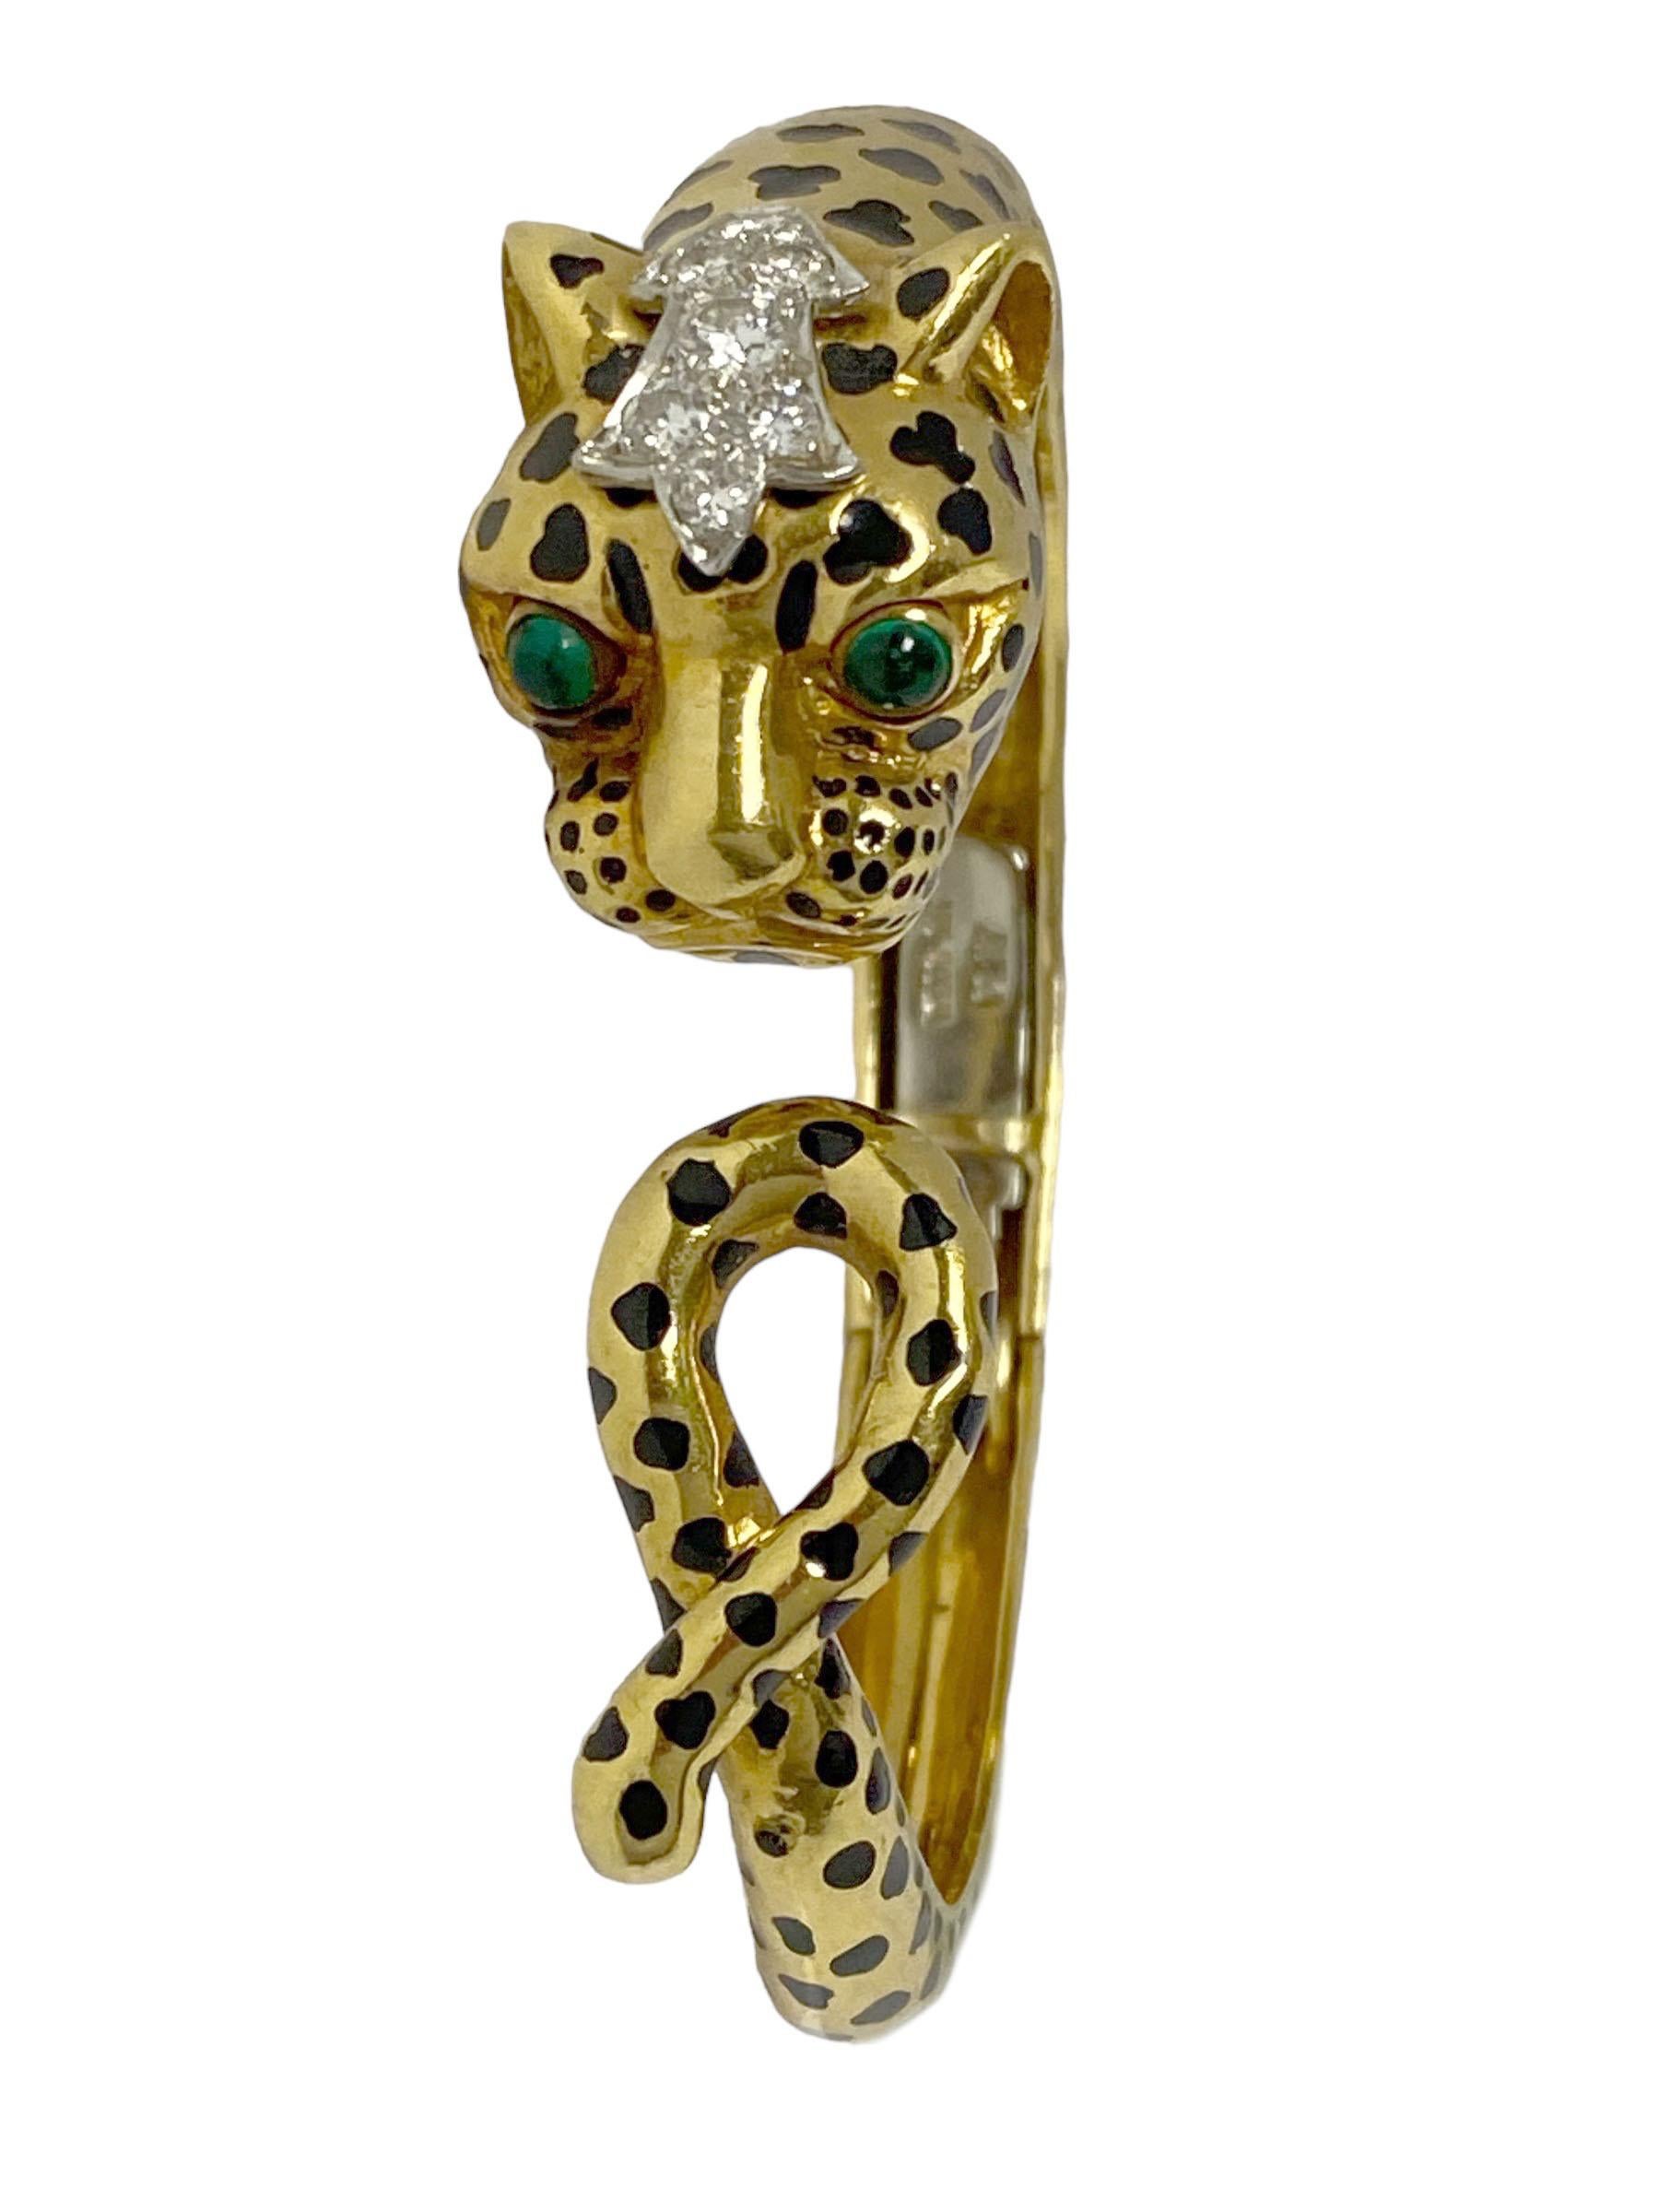 Circa 2000 David Webb Iconic Leopard hinged Bangle Bracelet, the head measures 1 x 3/4 inch with the bracelet tapering from 5/8 to 1/4 inch in width, finely detailed with the Famous David Webb Enameling, the top of the Head is set with Round